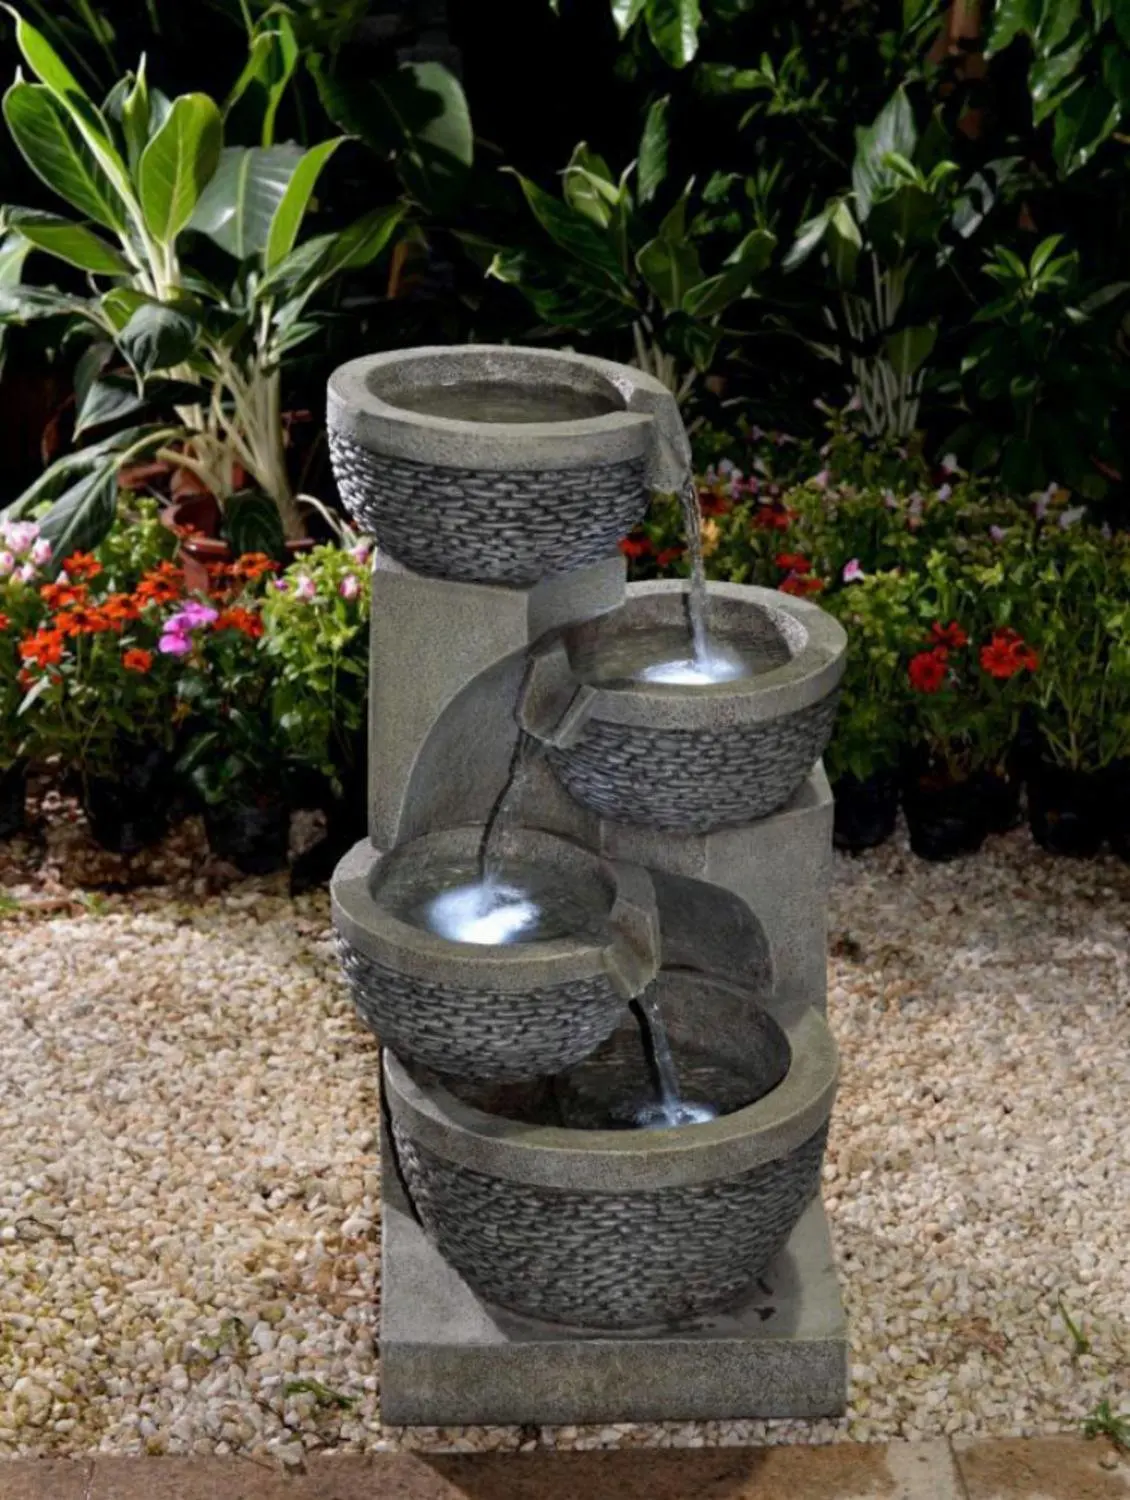 Buy Lighted Fountain with Artful Textured Patterns in Natural Slate in Cheap Price on